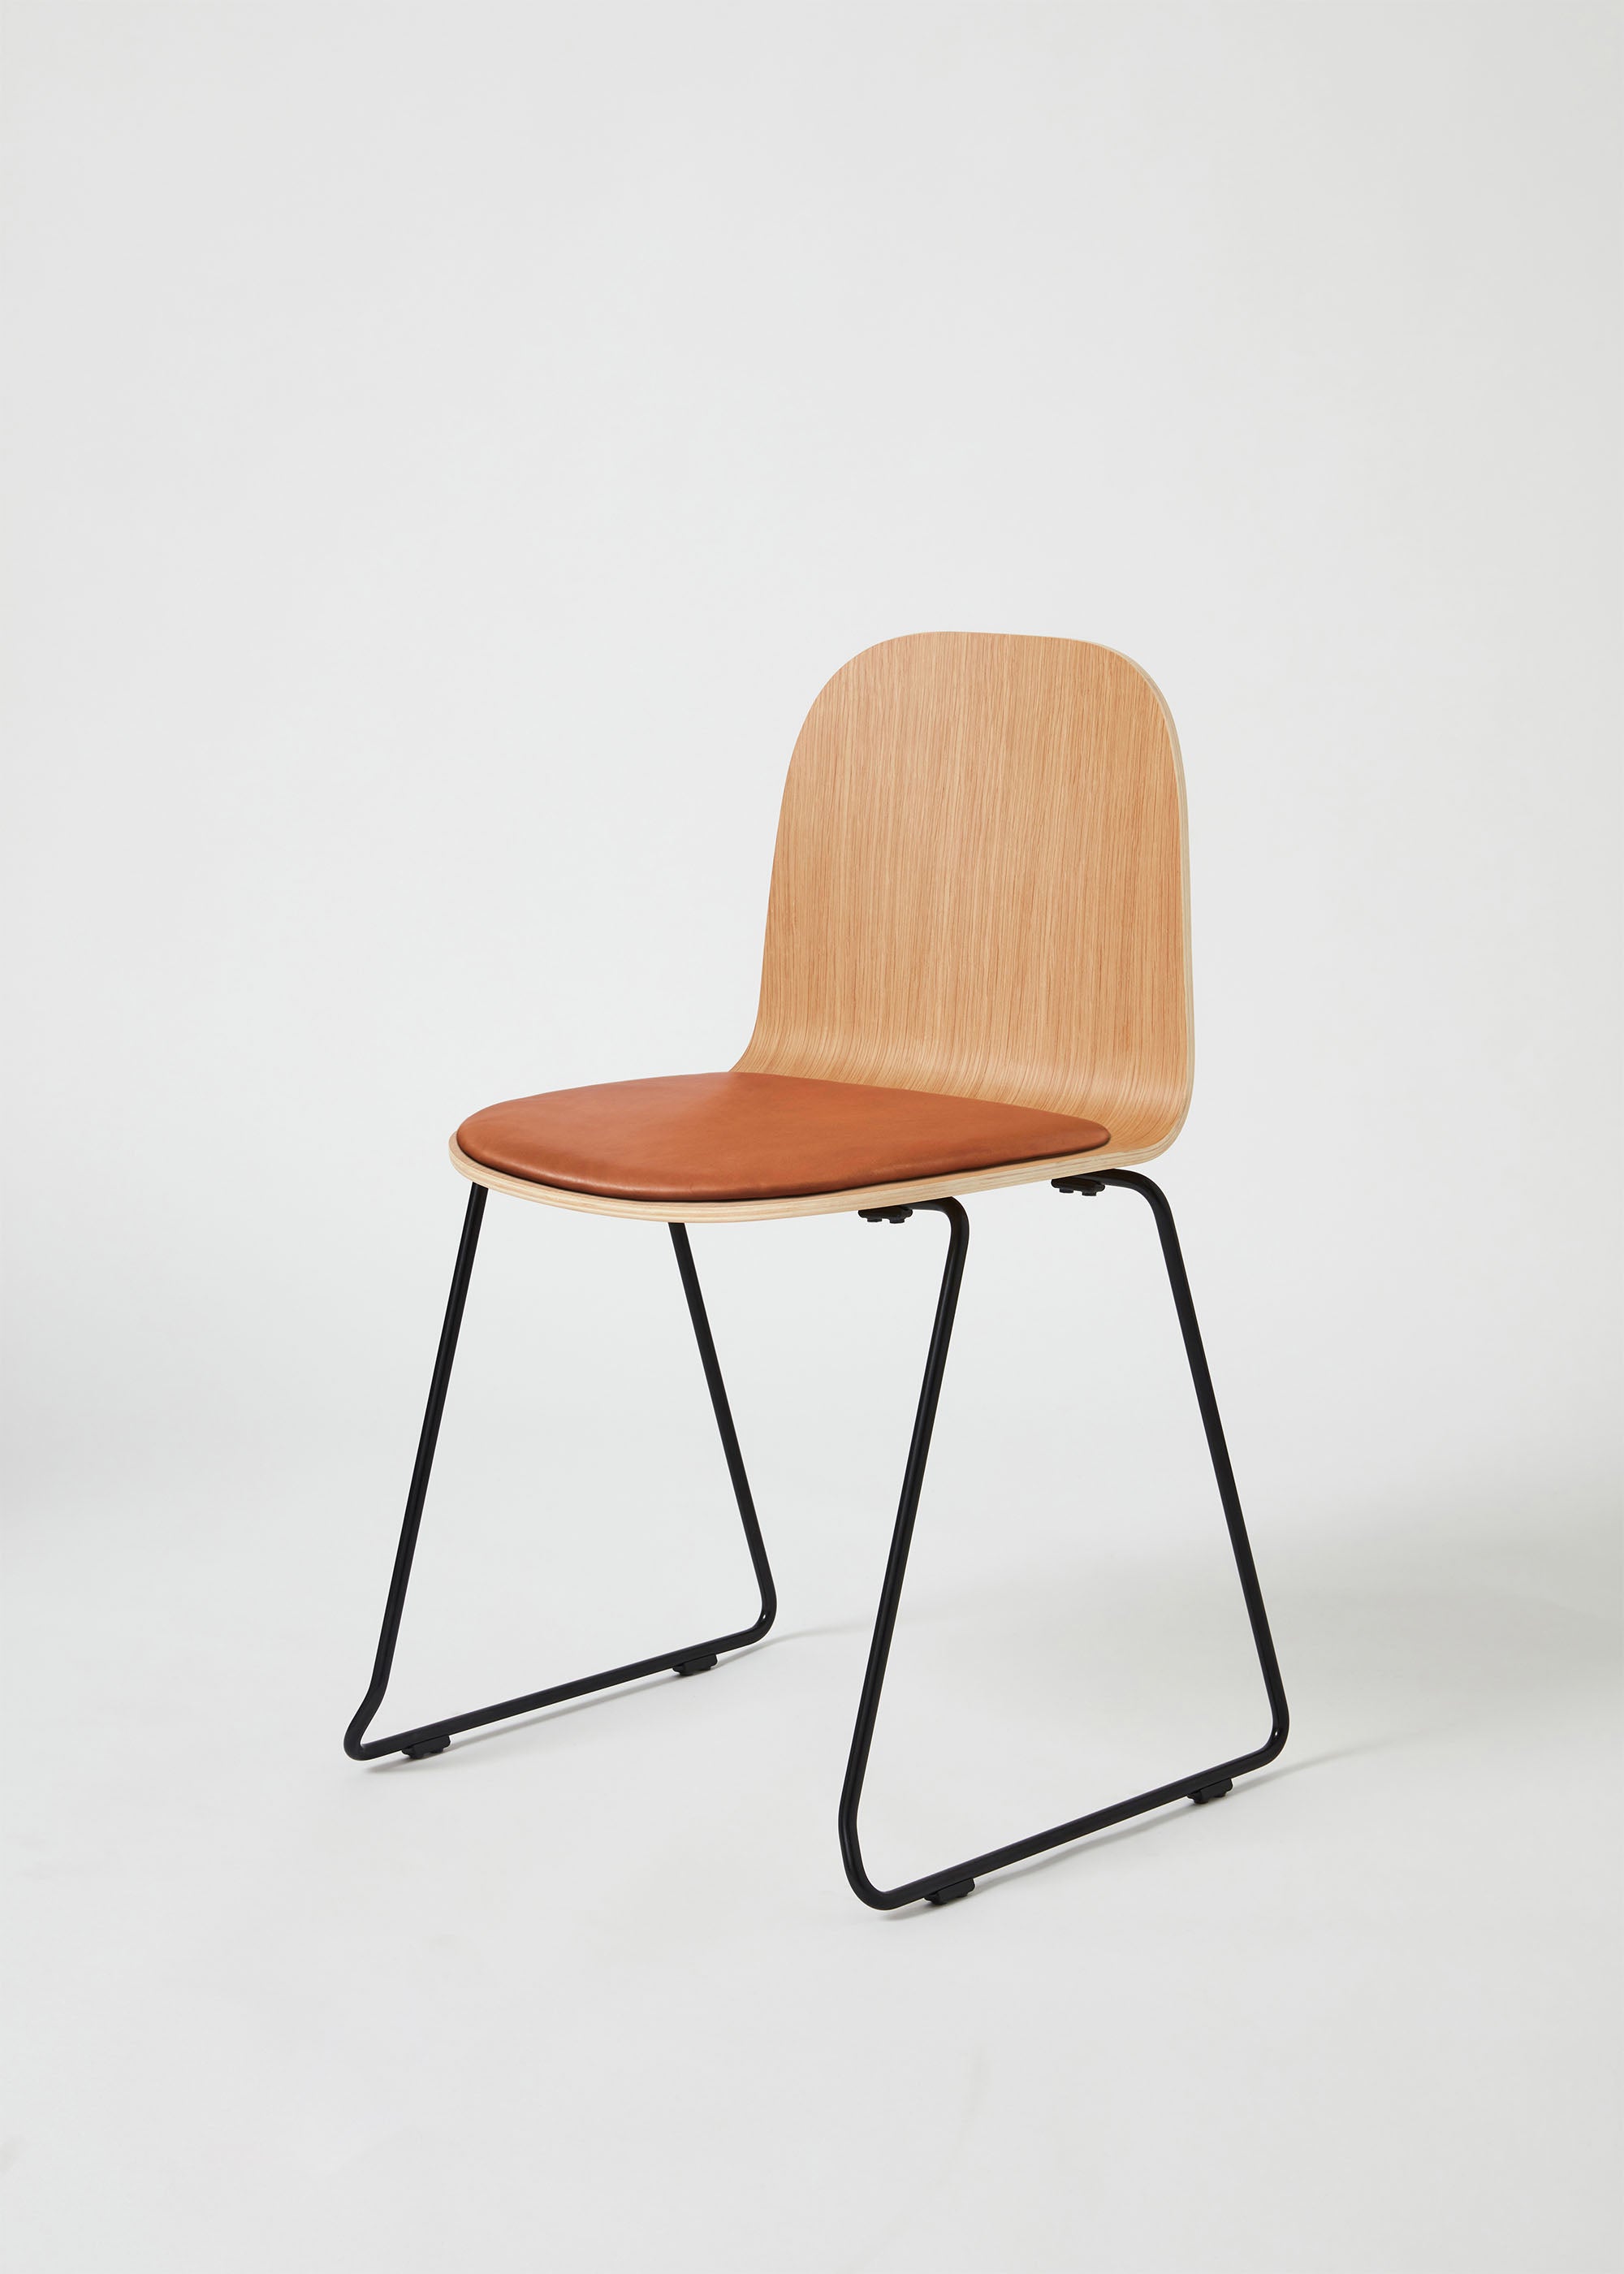 Potato Chair | Stacking Sled Timber & Upholstered Dining Office Chair with Handle | GibsonKarlo | DesignByThem 